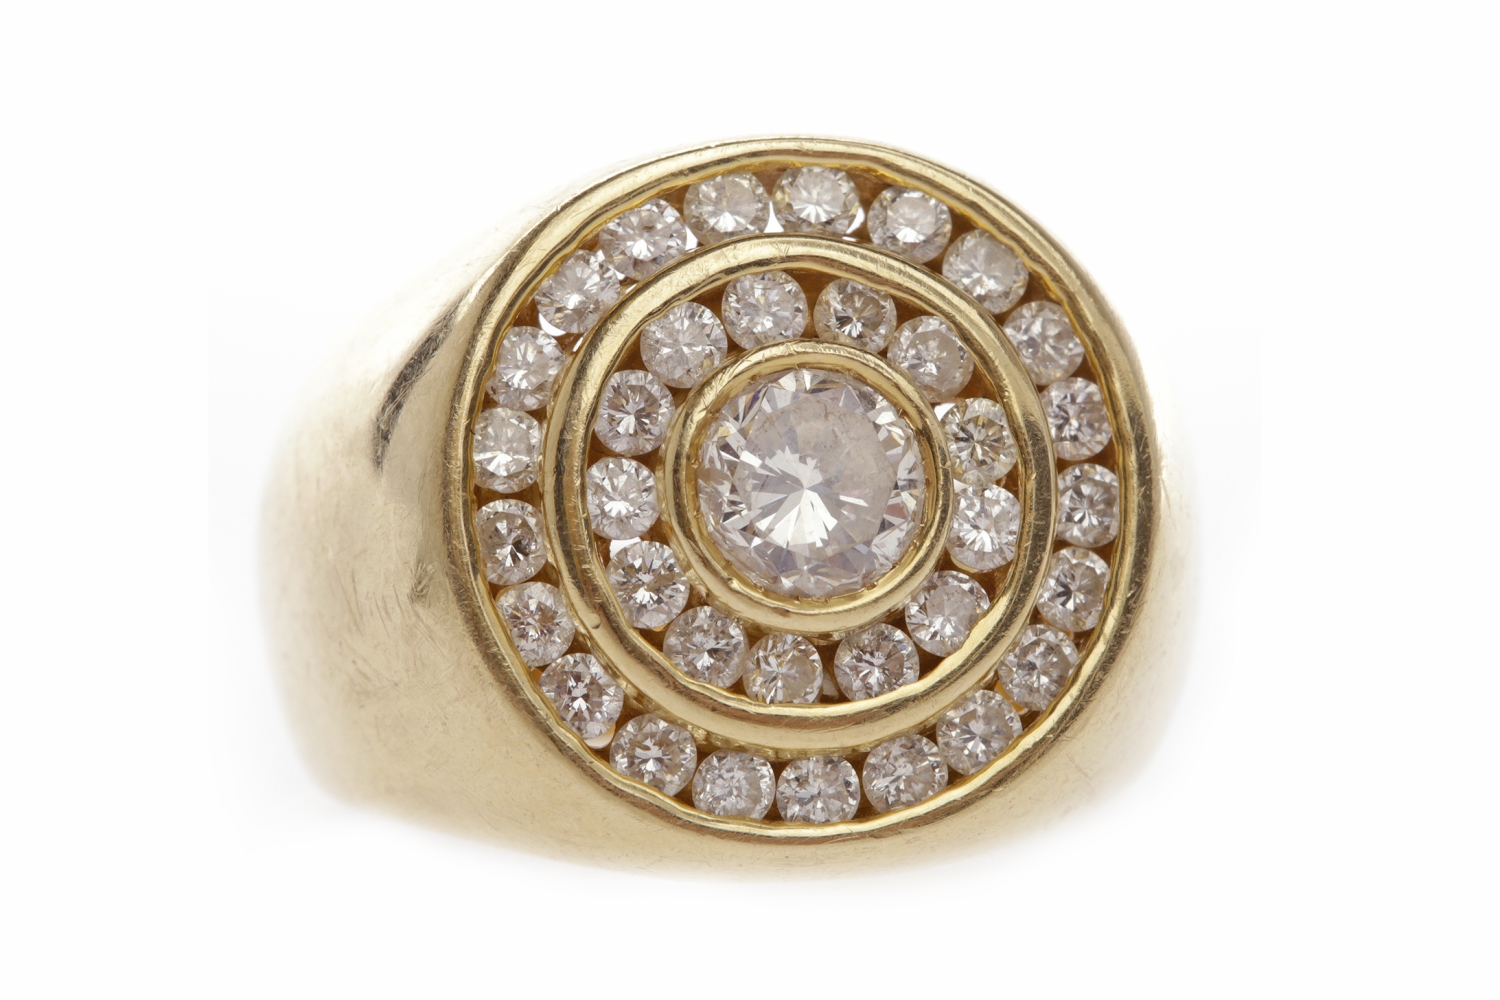 GENTLEMAN'S DIAMOND TARGET RING set with a central round brilliant cut stone of approximately 0.